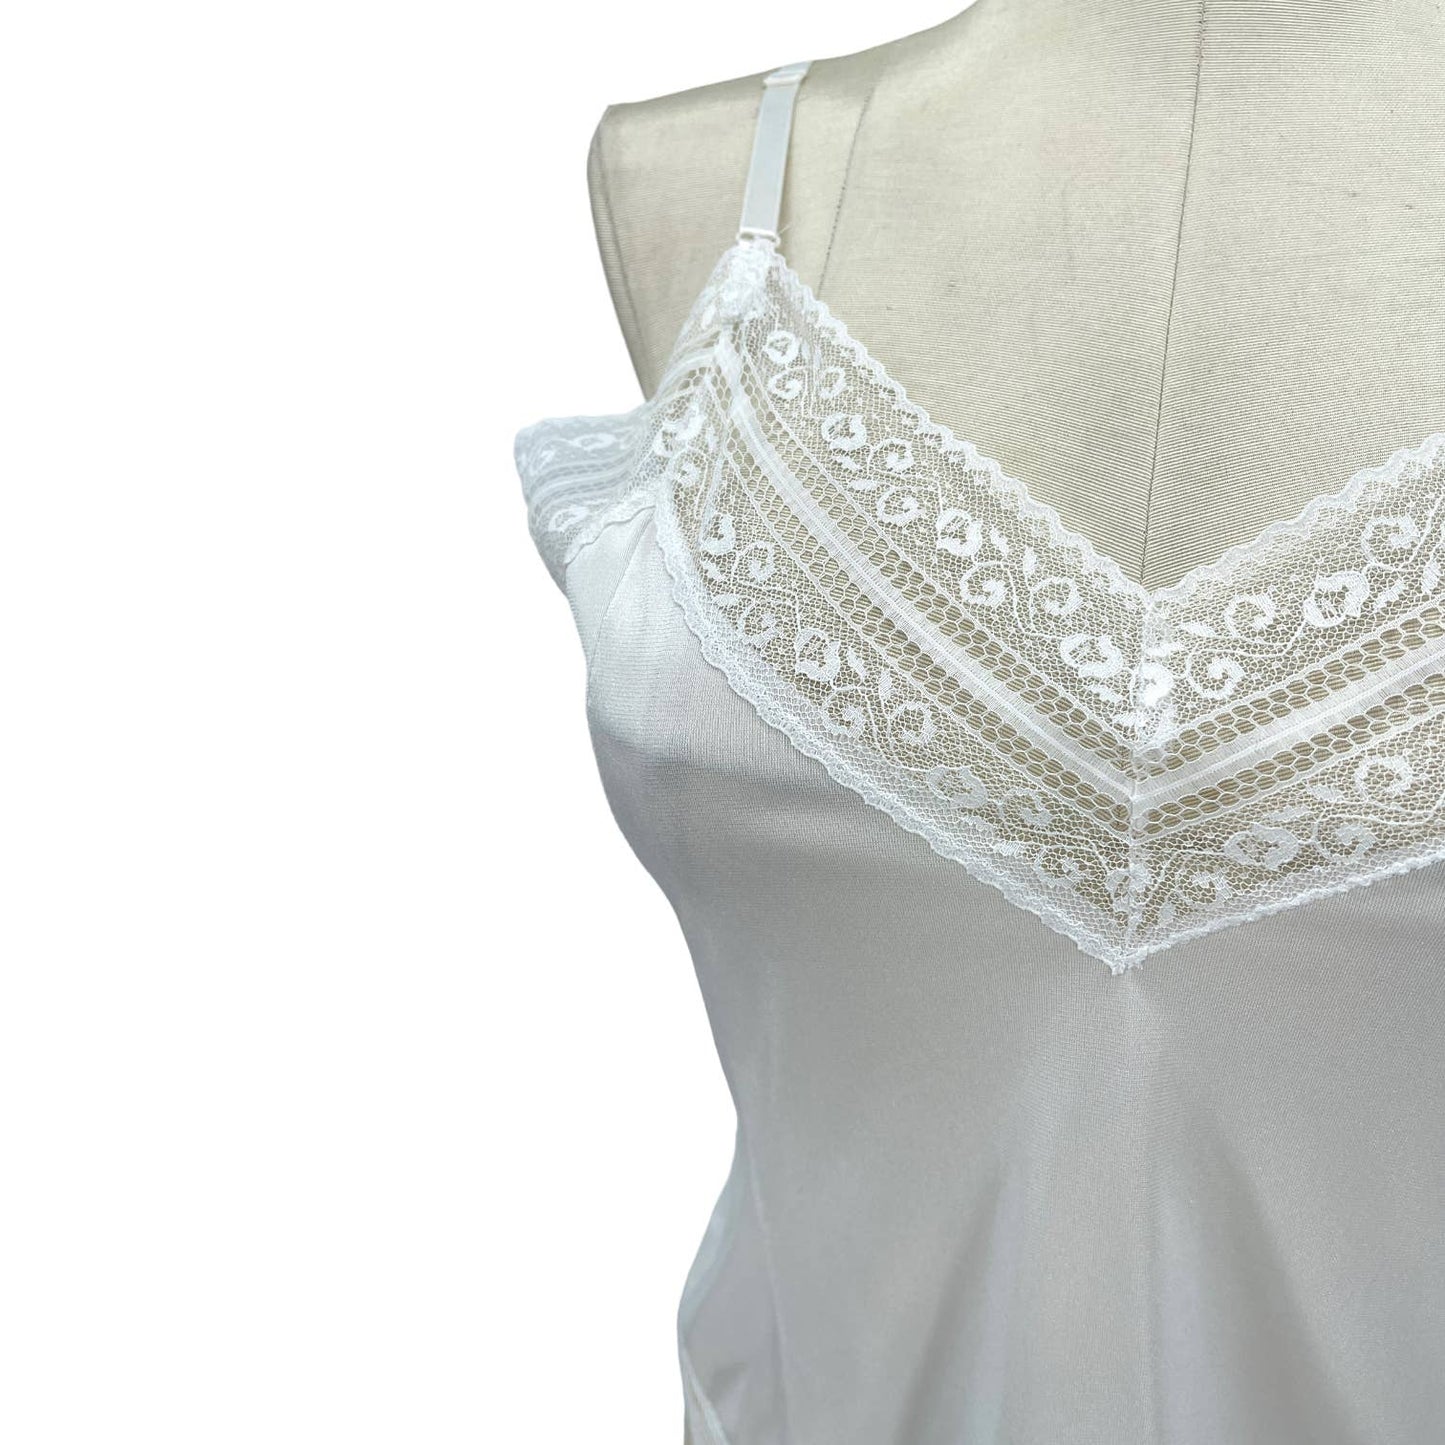 Vintage 80s White Satin Camisole Sleeveless Top Floral Romantic by Bari Size 1X